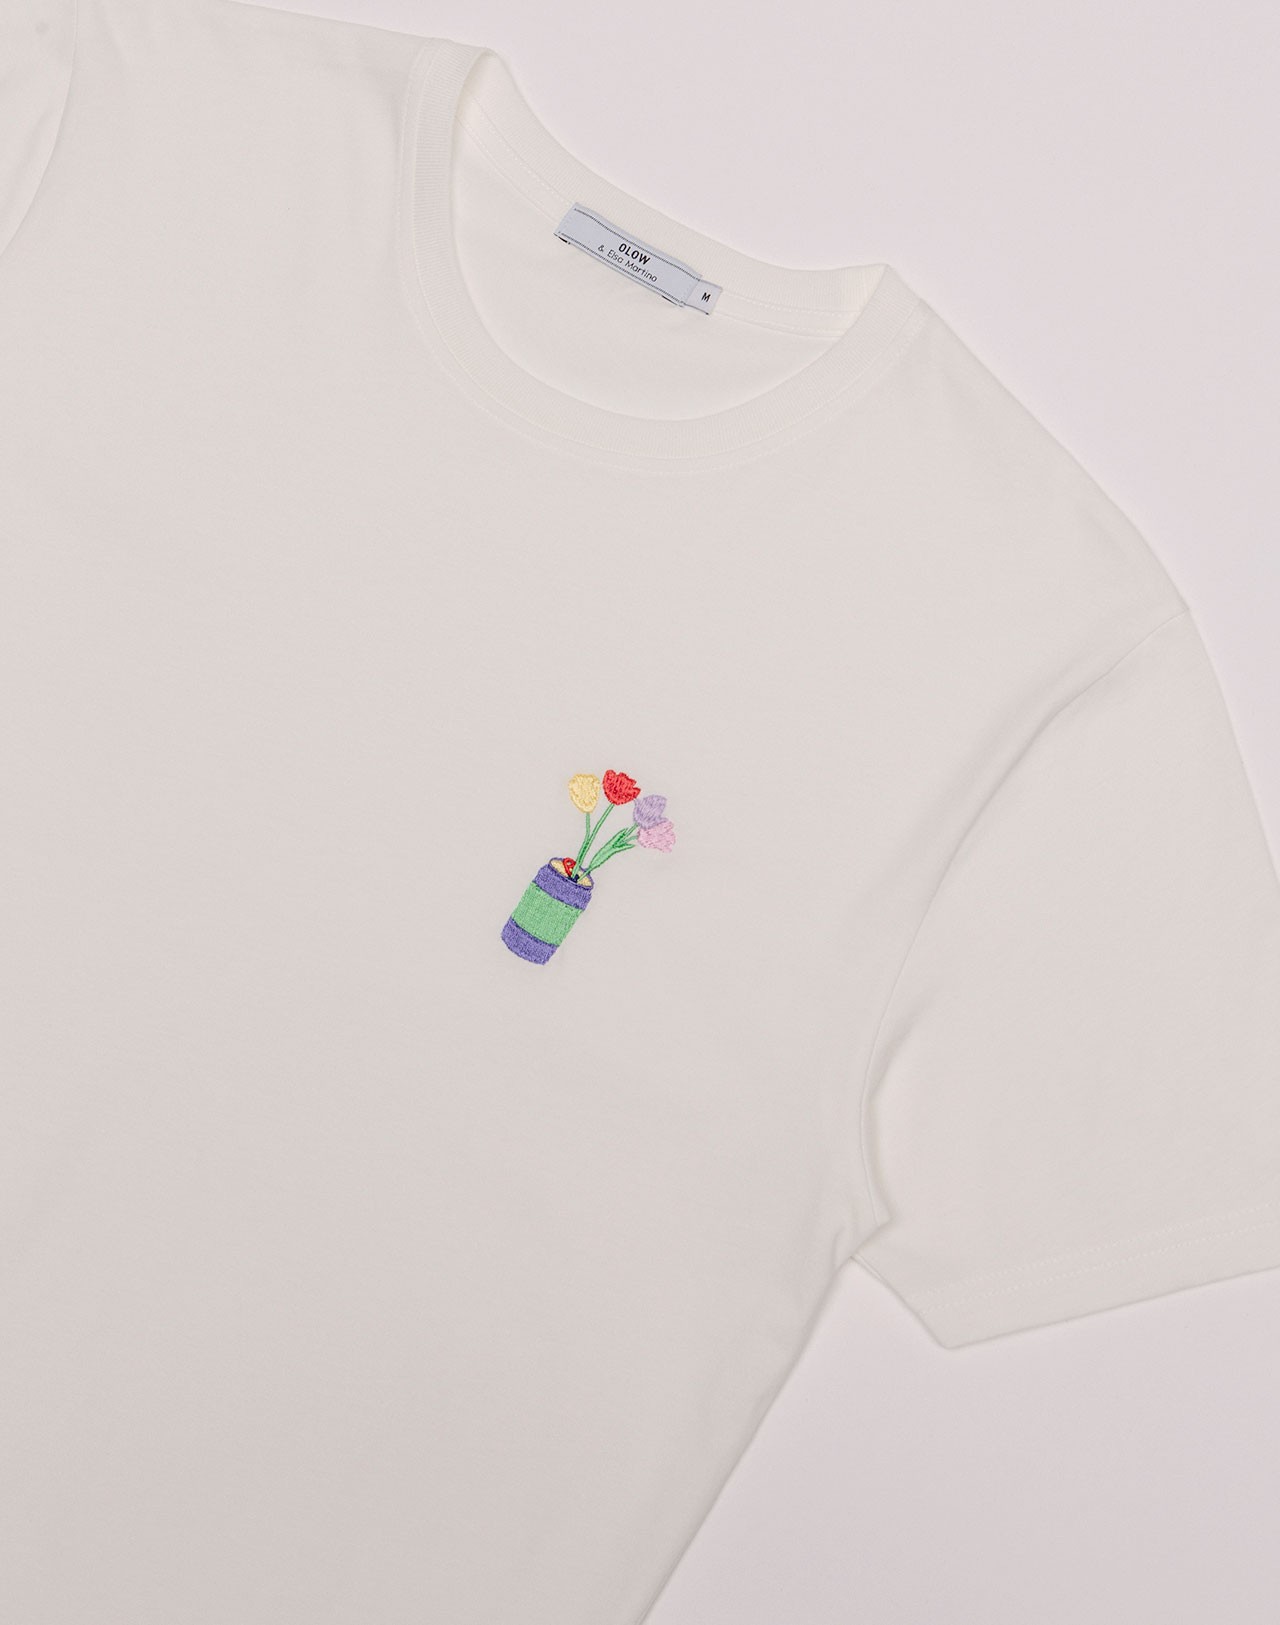 Canette Tee Shirt